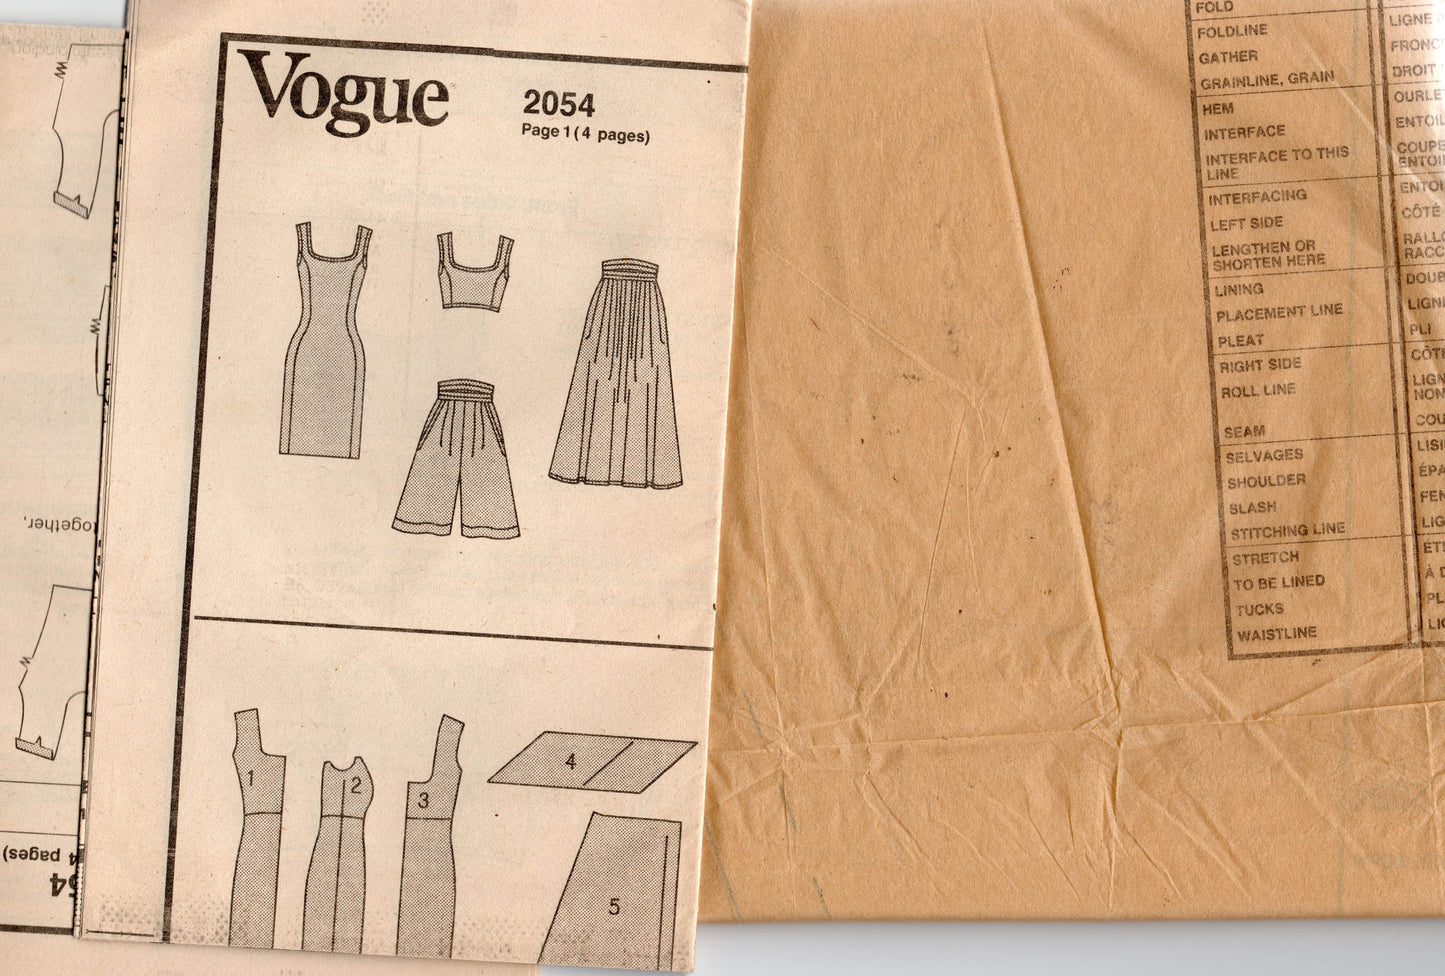 Vogue American Designer 2054 PERRY ELLIS Womens Dress Bra Top Skirt & Shorts 1980s Vintage Sewing Pattern Size 10 Bust 32.5 inches